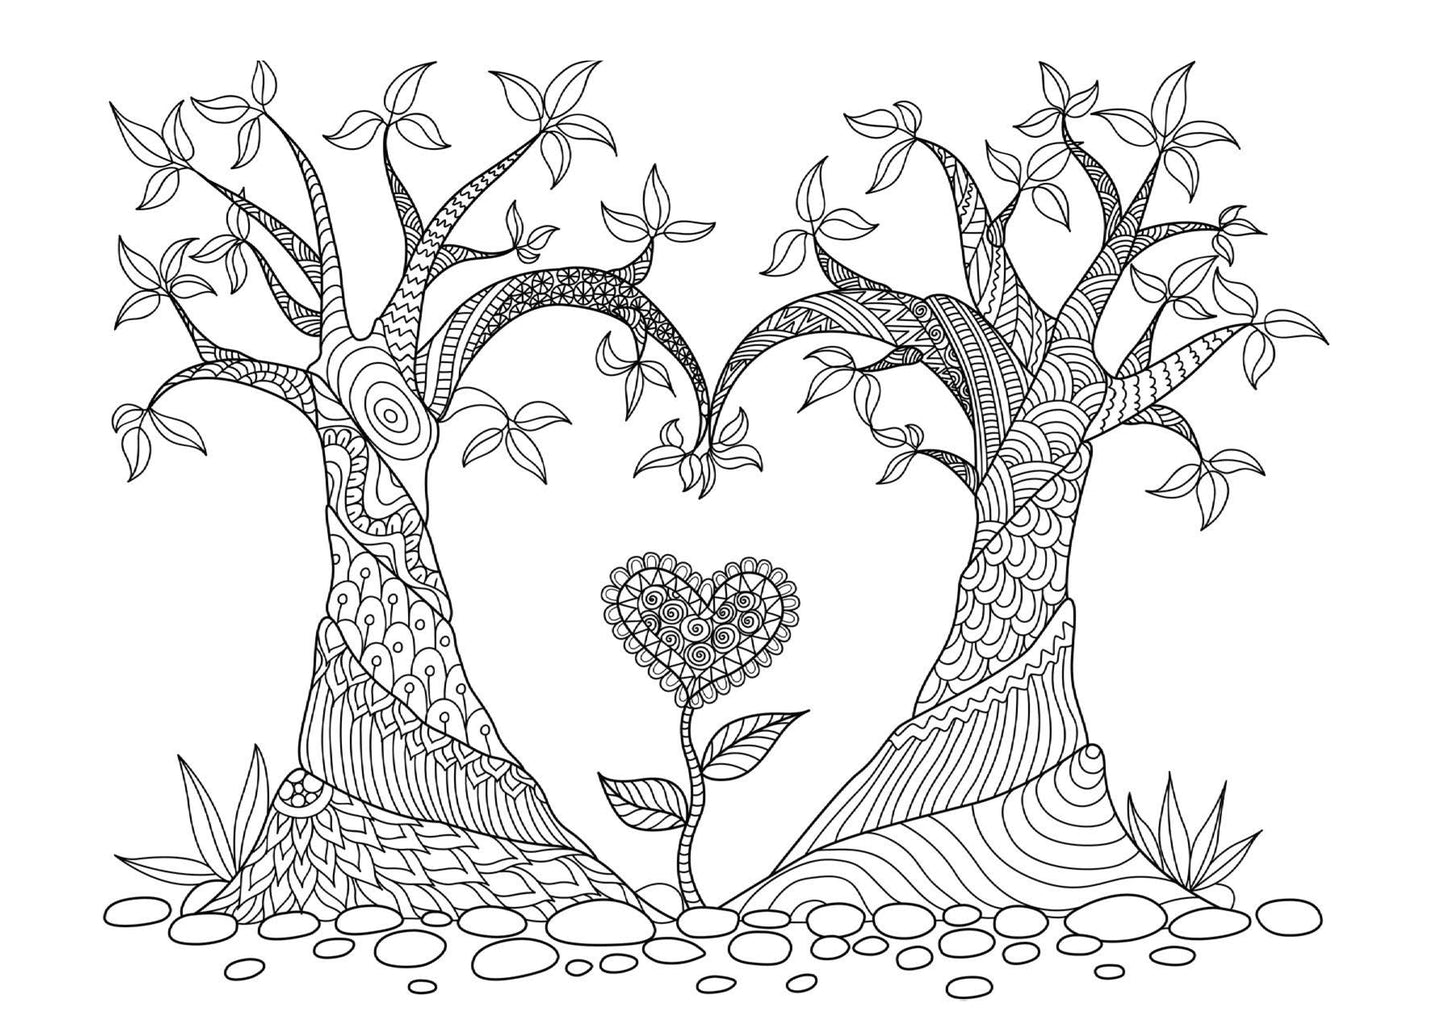 heartshaped tree coloring book for adults